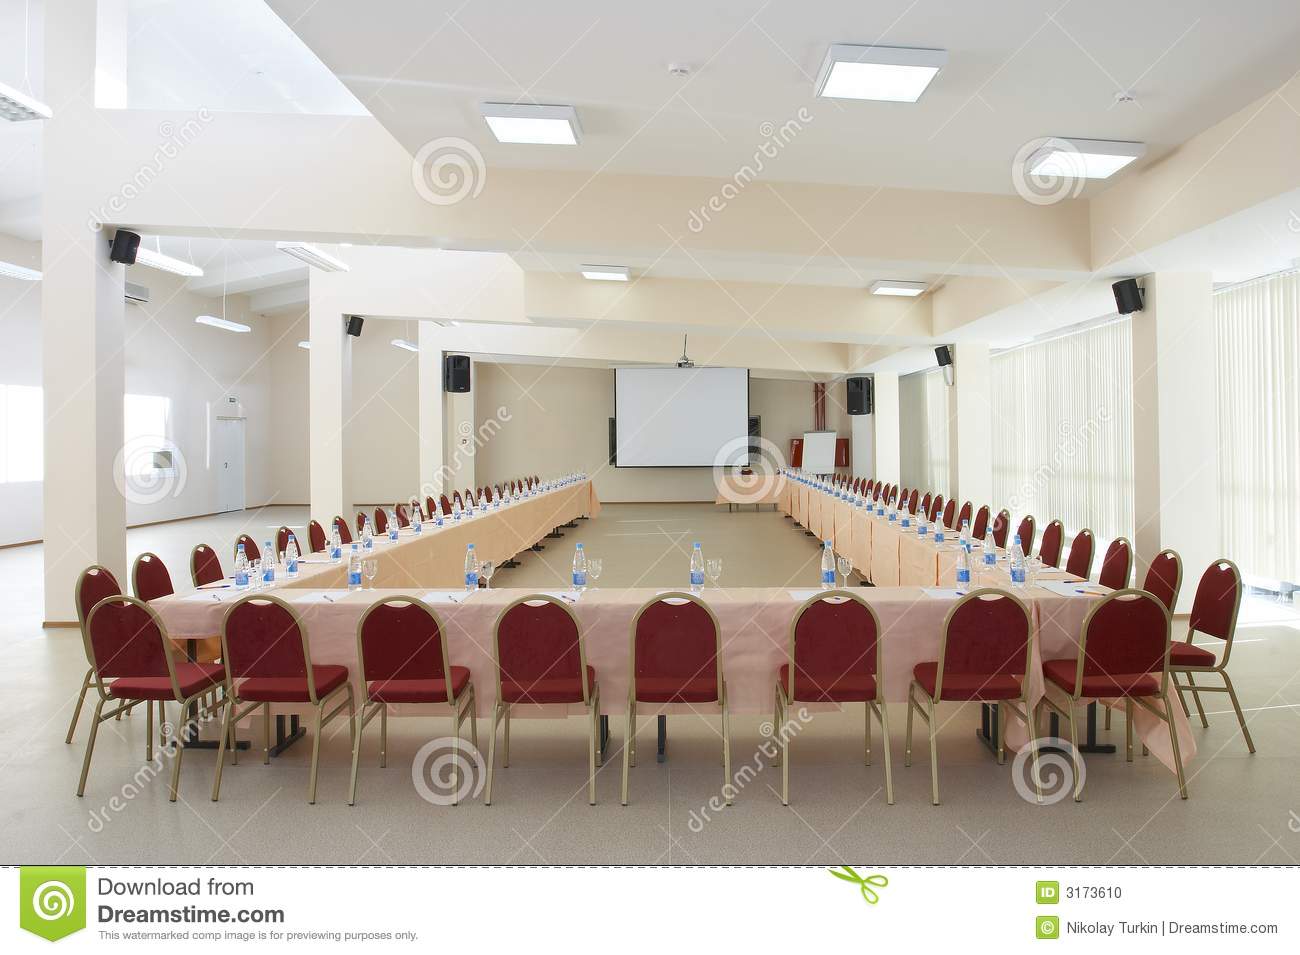 Conference Hall  1 Stock Photo   Image  3173610